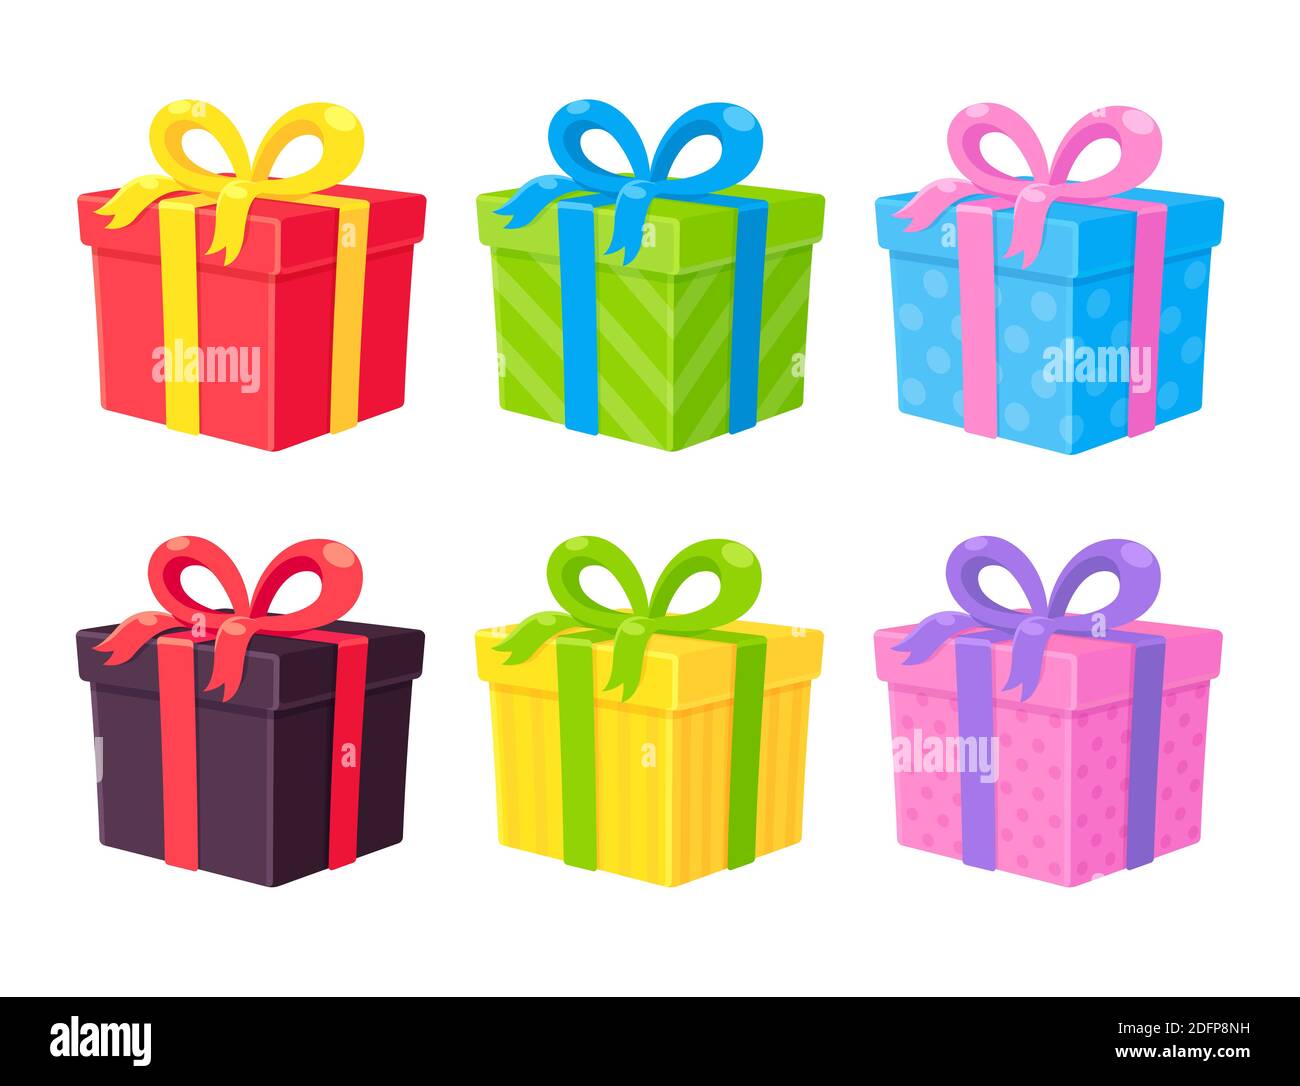 Christmas gift boxes set, different colors. Wrapped present box with ribbon bow. Isolated vector illustration. Stock Vector